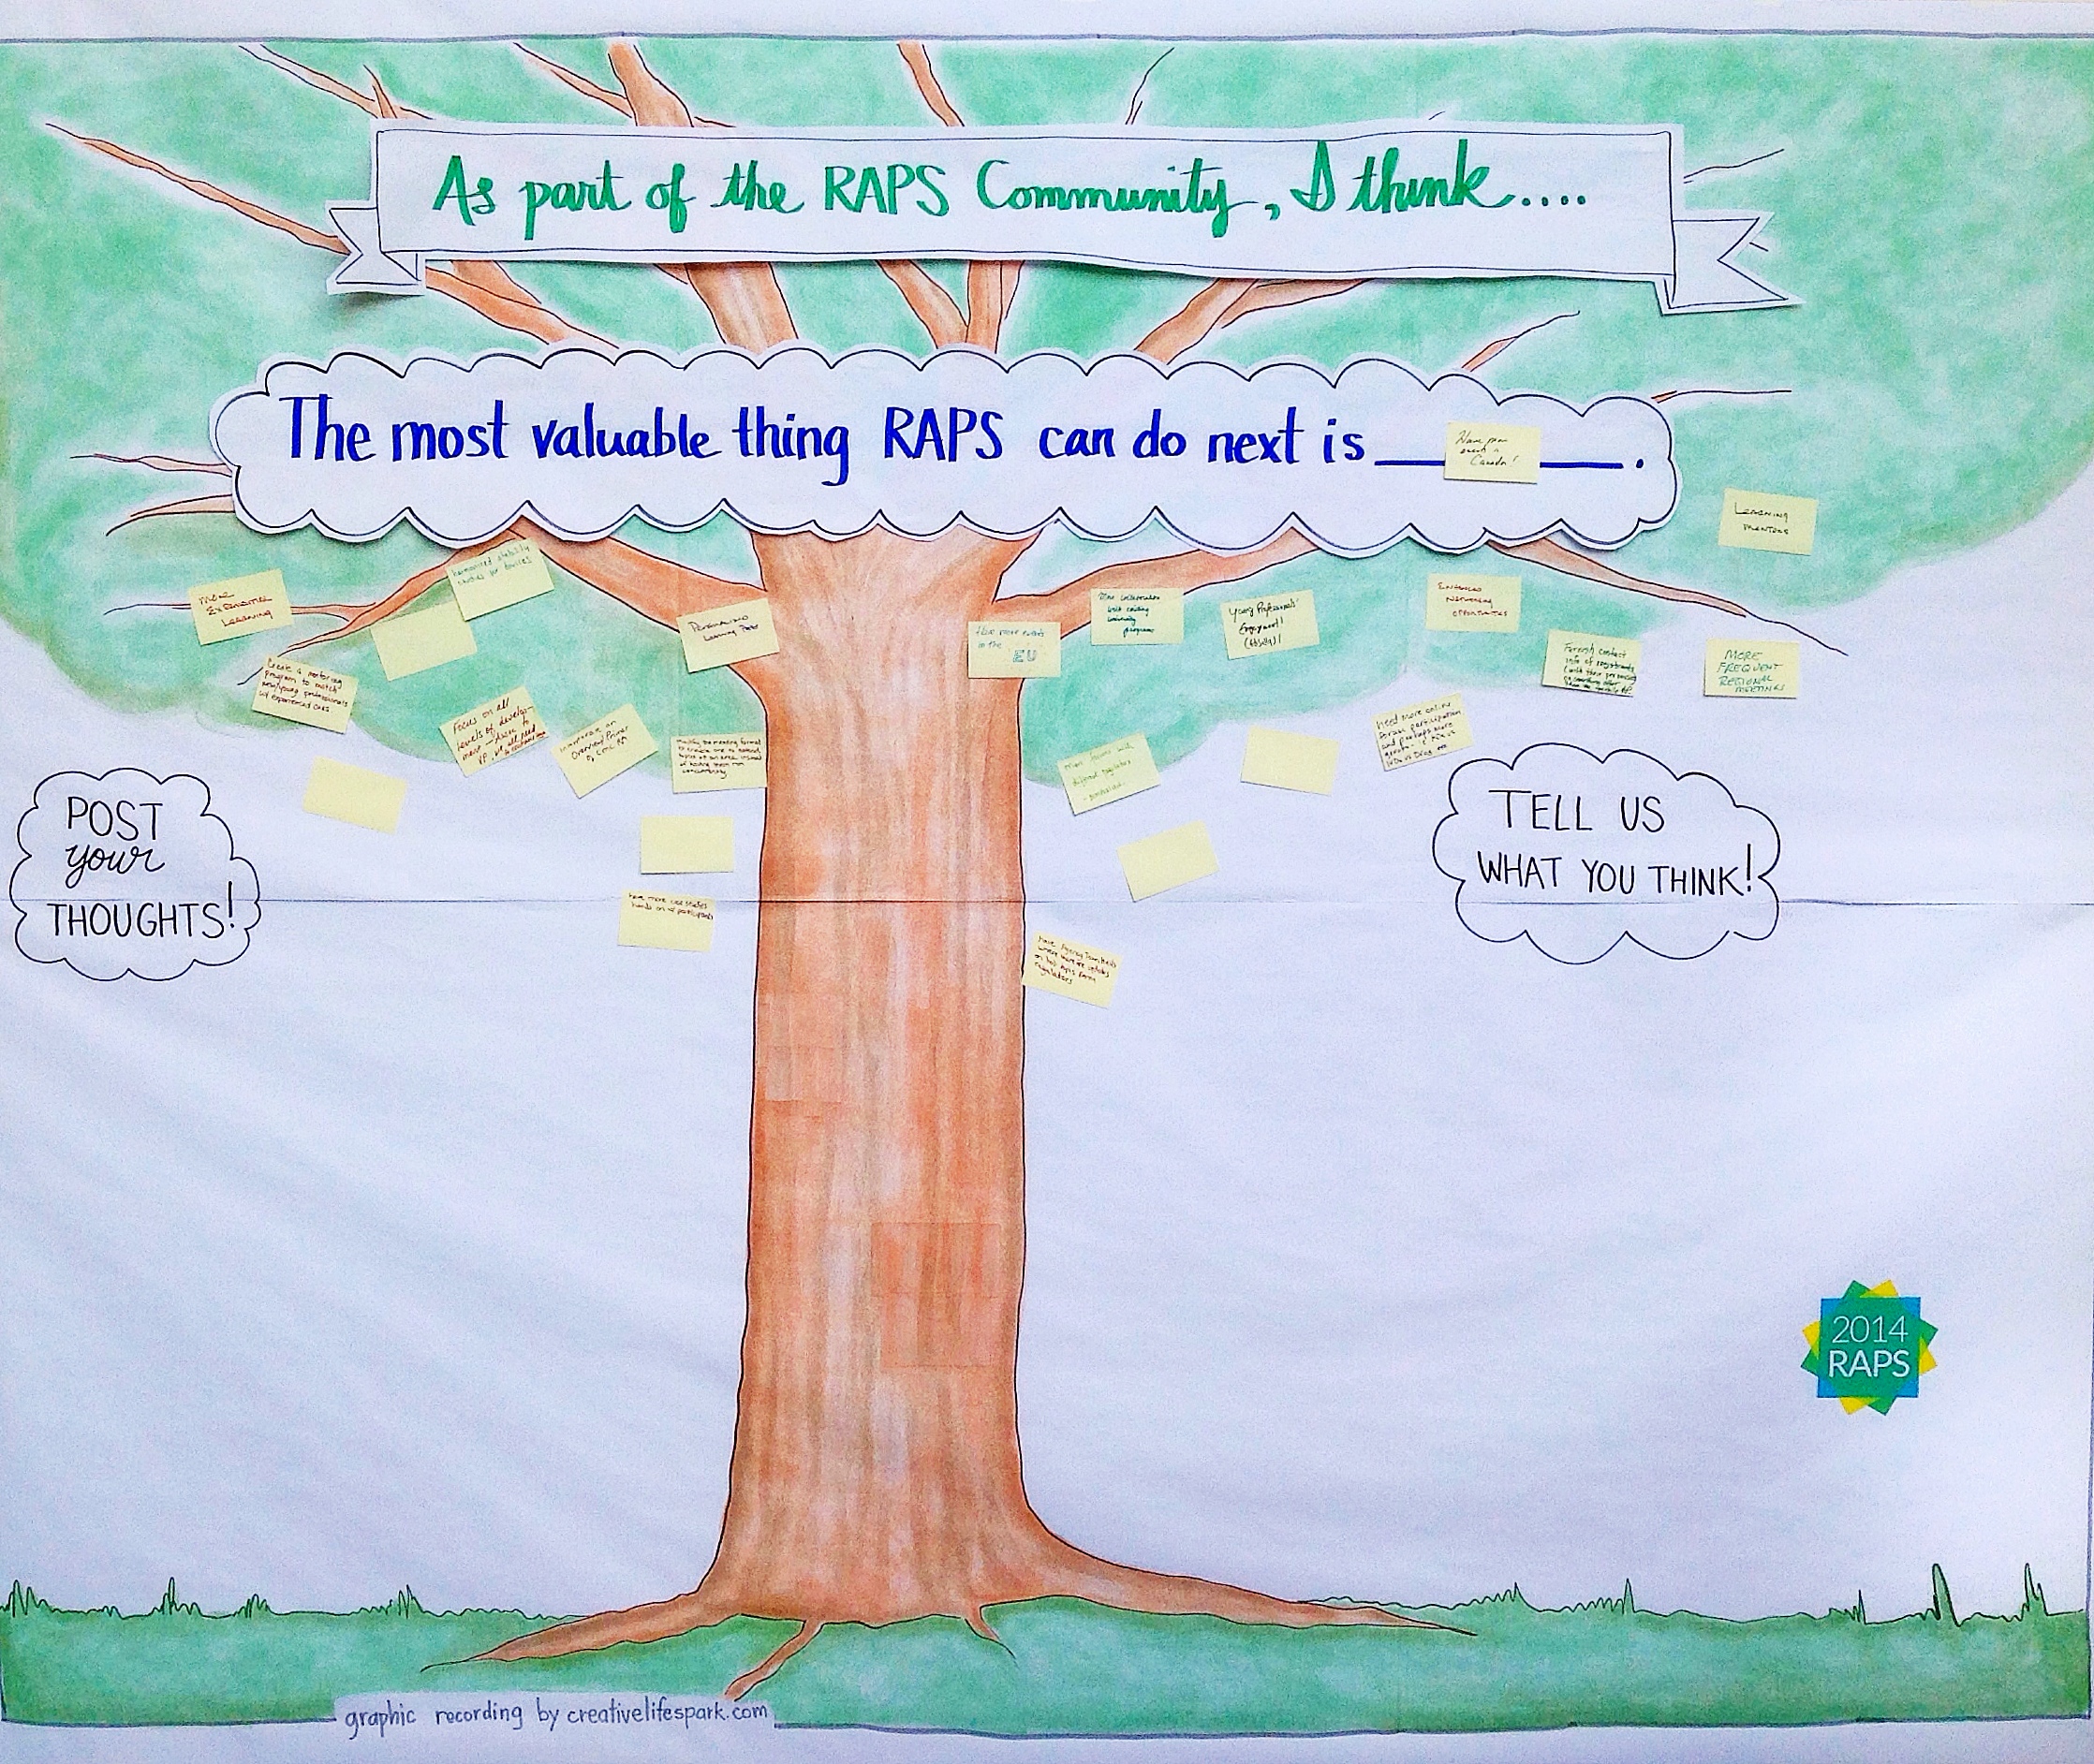 Graphic Recording at 2015 RAPS convention by Creative Catalyst, Katherine Torrini